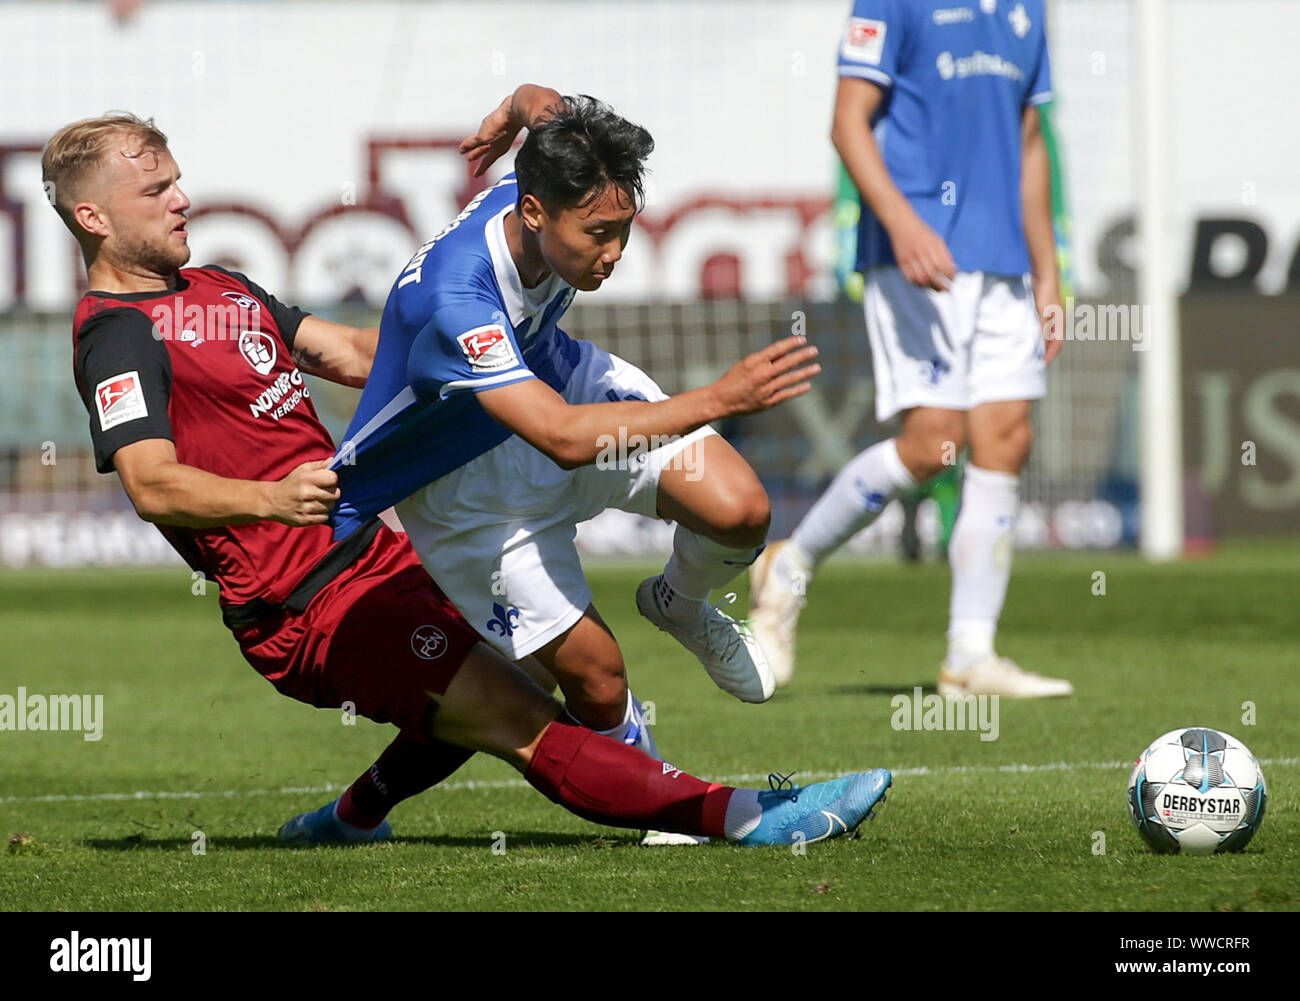 Darmstadt, Germany. 15th Sep, 2019. Soccer: 2nd Bundesliga, Darmstadt 98 - 1st FC Nuremberg, 6th matchday. The Darmstadt Seung-ho Paik (R) in a duel with Johannes Geis (L) from Nuremberg. Credit: Hasan Bratic/dpa - IMPORTANT NOTE: In accordance with the requirements of the DFL Deutsche Fußball Liga or the DFB Deutscher Fußball-Bund, it is prohibited to use or have used photographs taken in the stadium and/or the match in the form of sequence images and/or video-like photo sequences./dpa/Alamy Live News Stock Photo